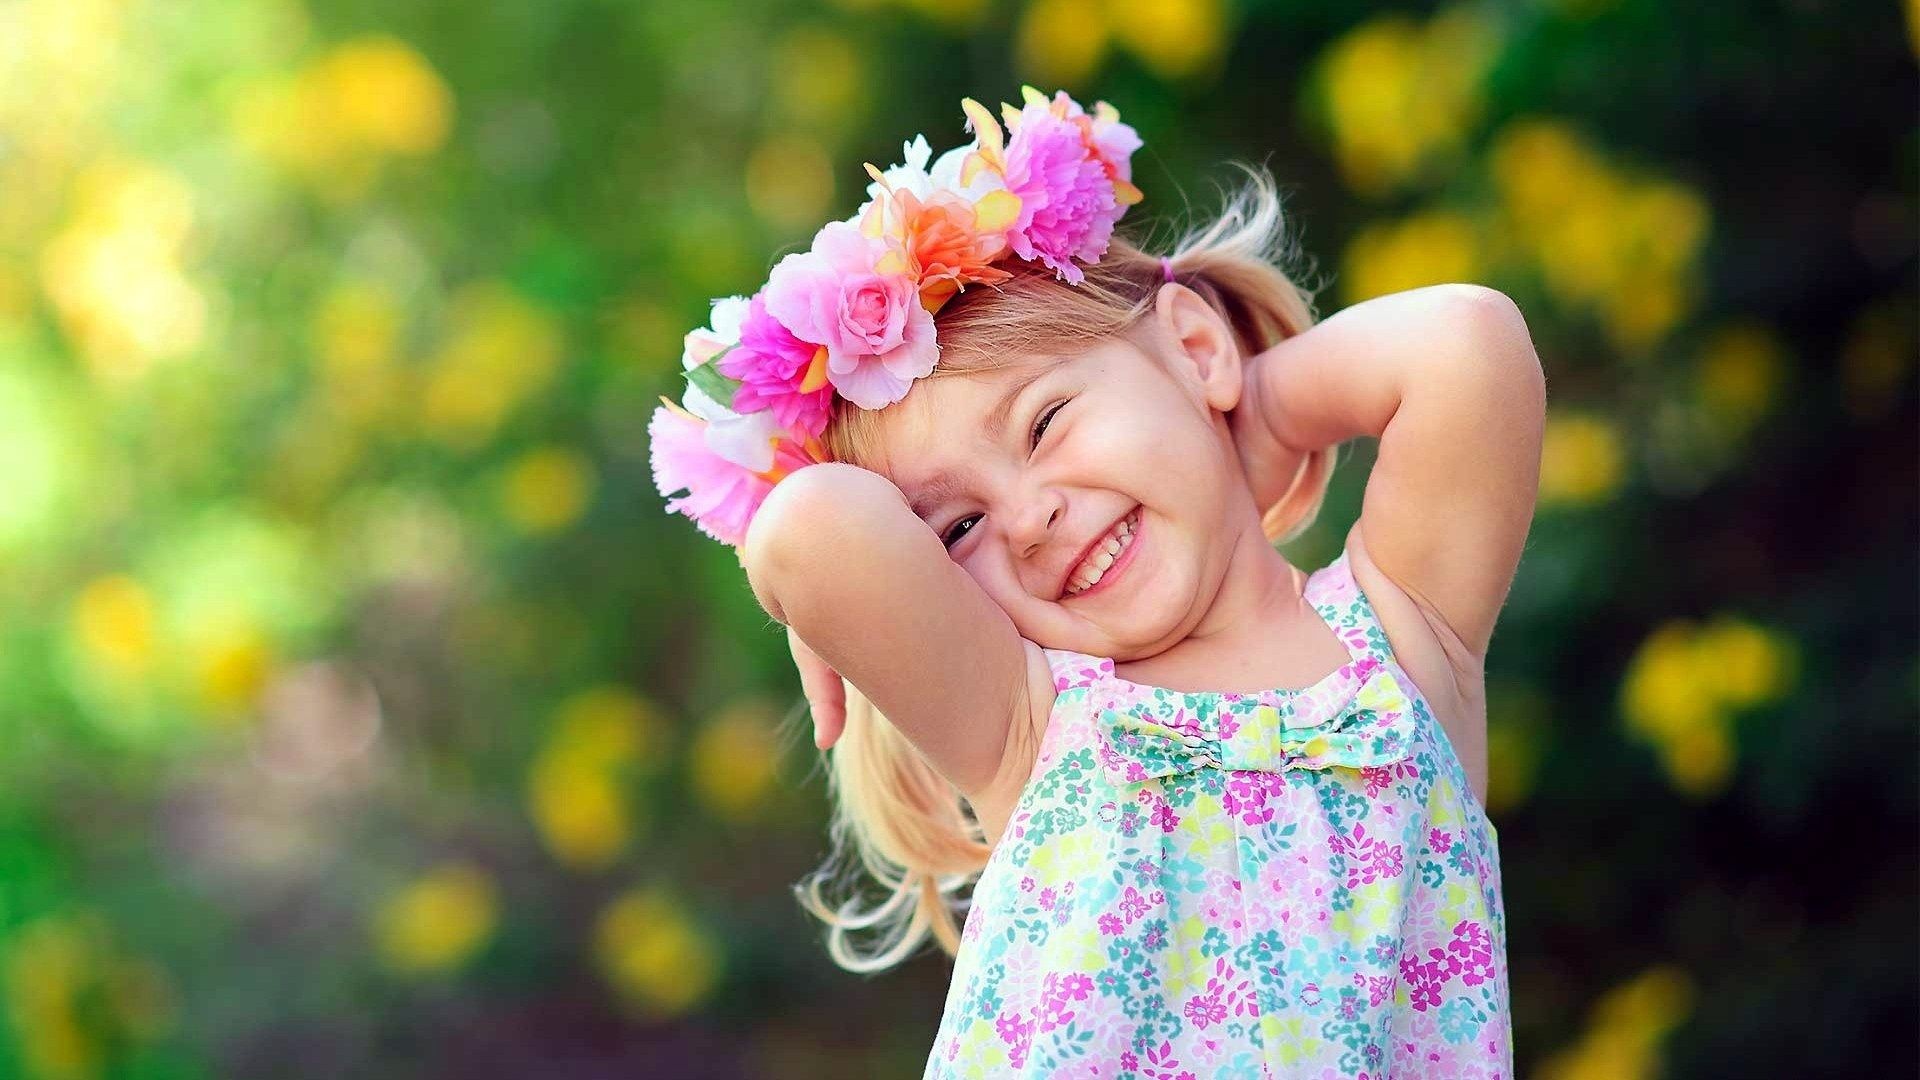 Collection of Cute Little Girl Wallpapers on HDWallpapers